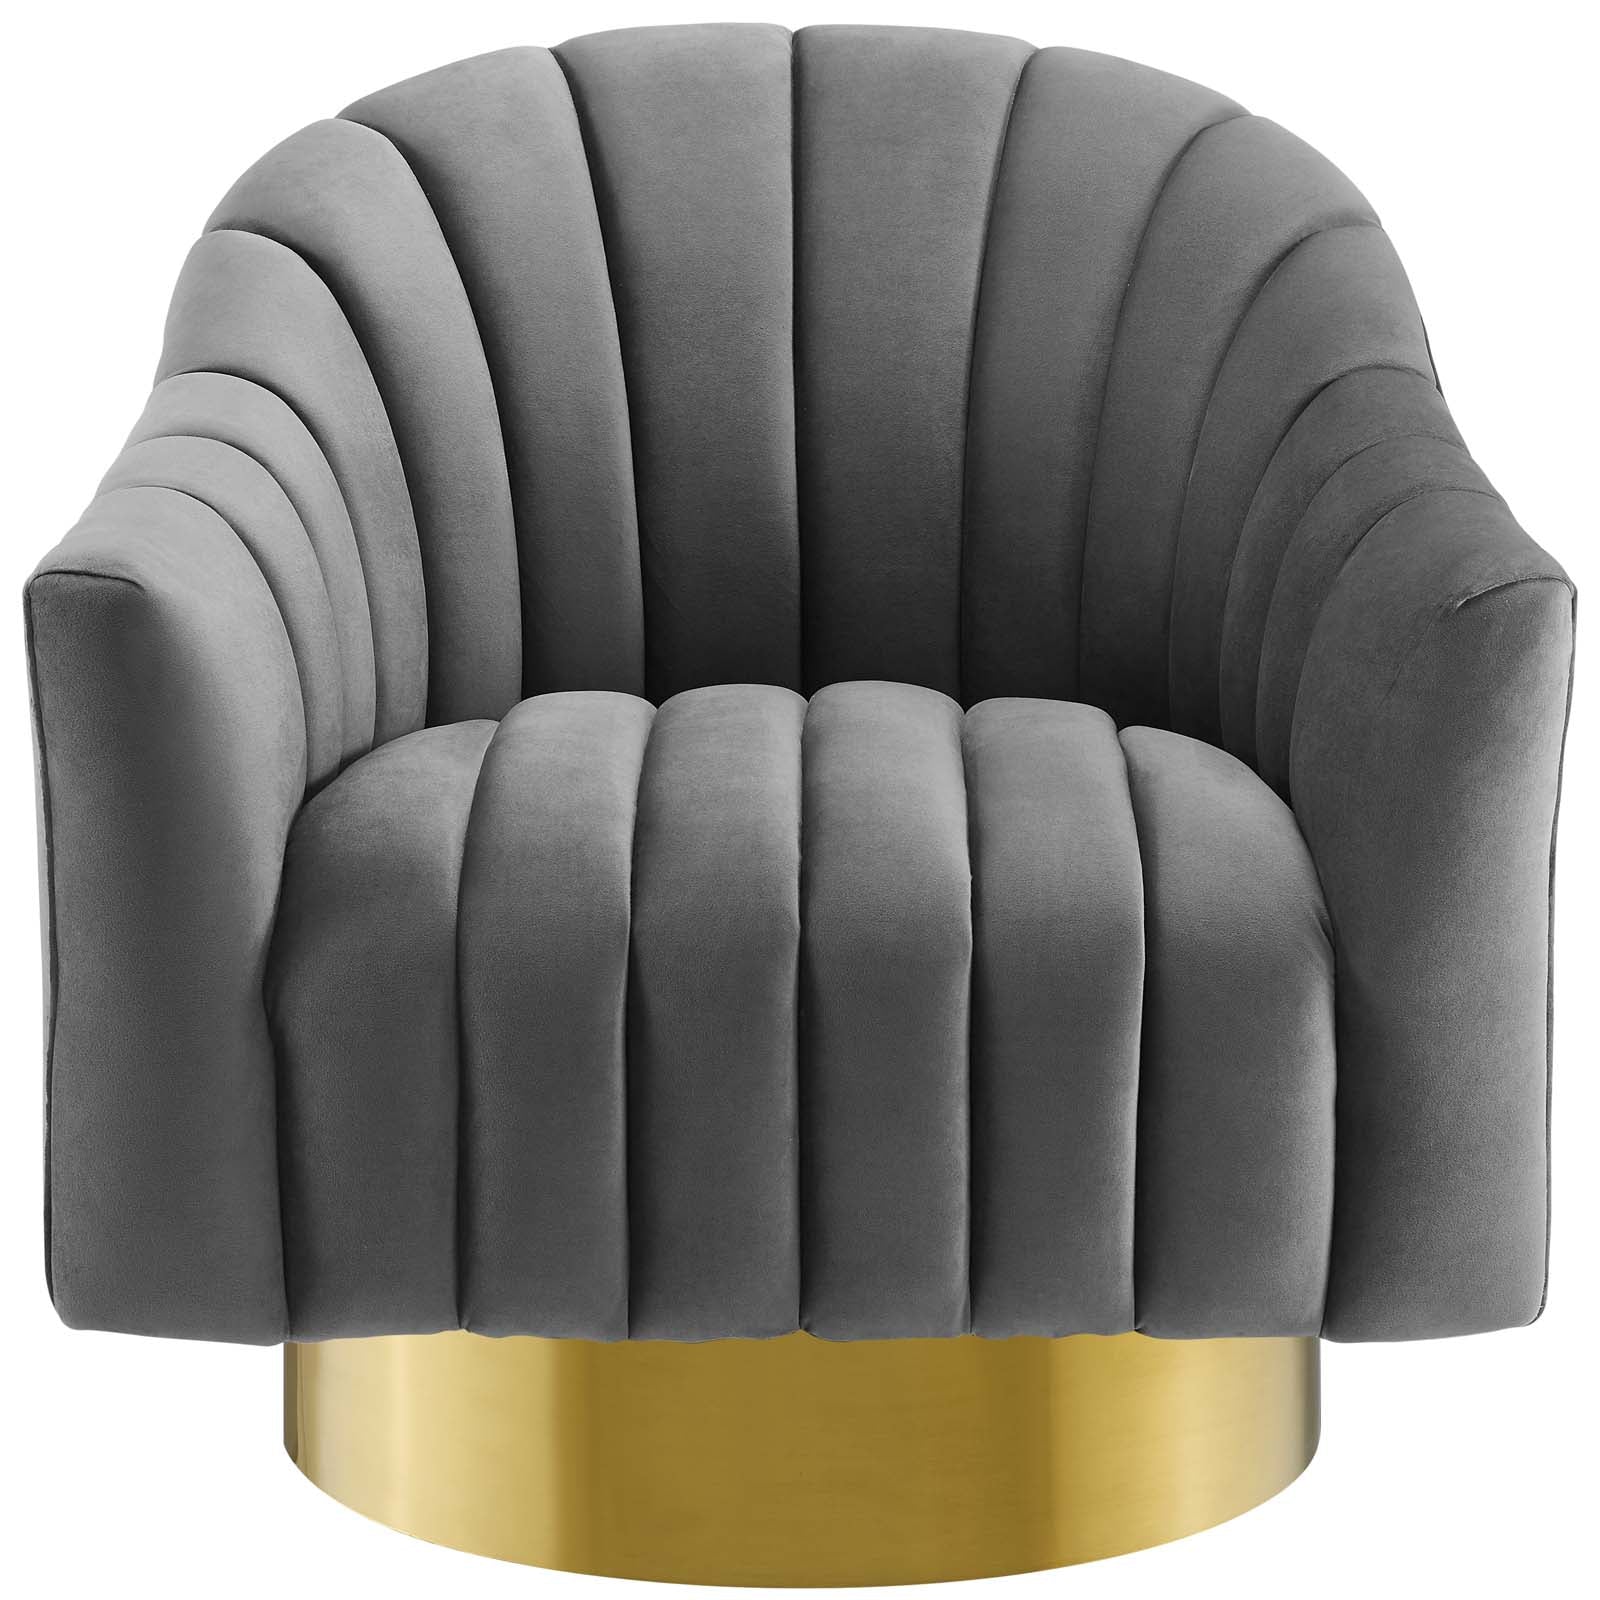 Buoyant Vertical Channel Tufted Accent Lounge Performance Velvet Swivel Chair-Chair-Modway-Wall2Wall Furnishings